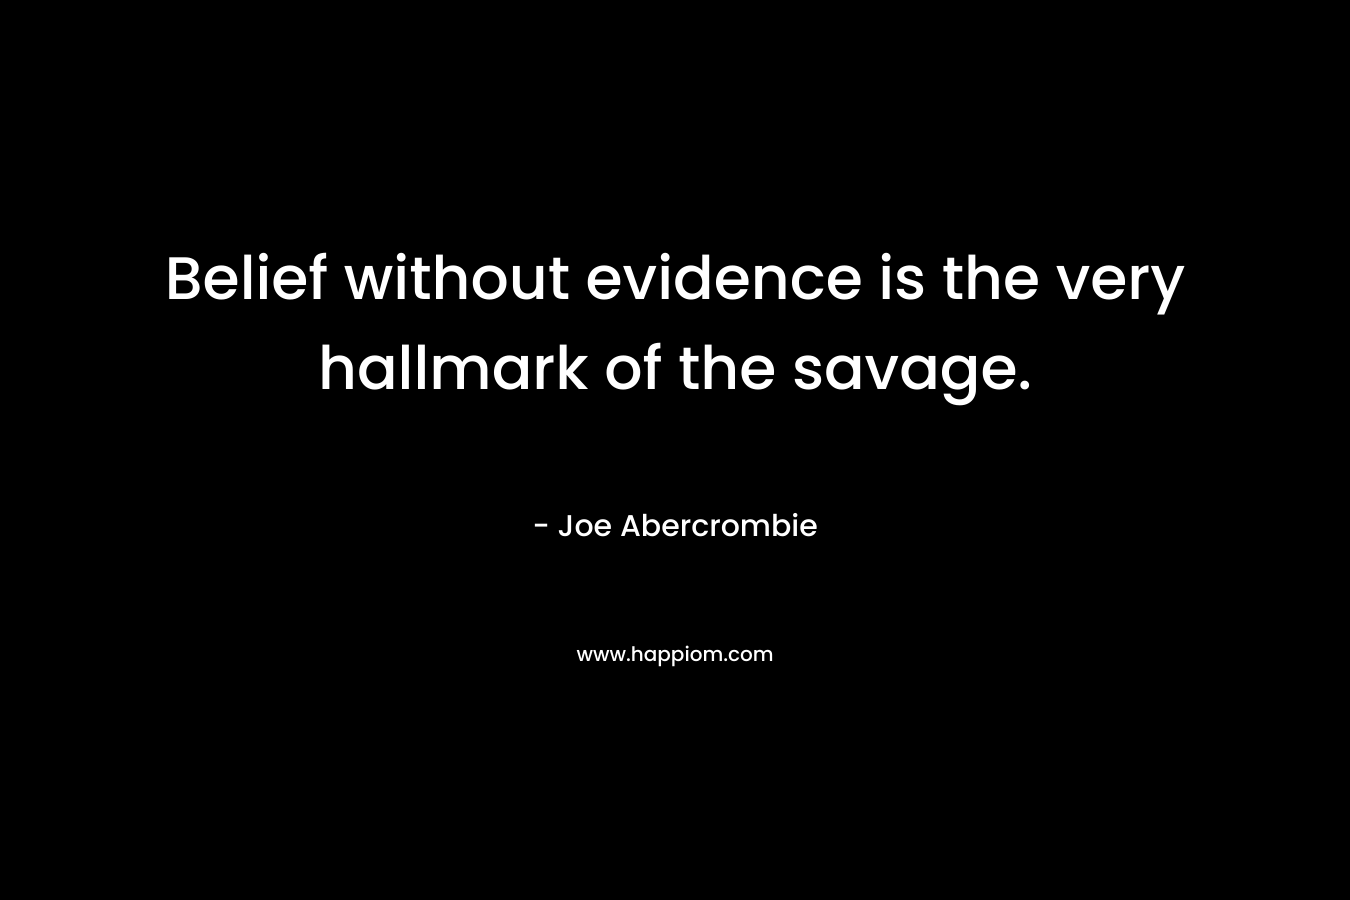 Belief without evidence is the very hallmark of the savage.